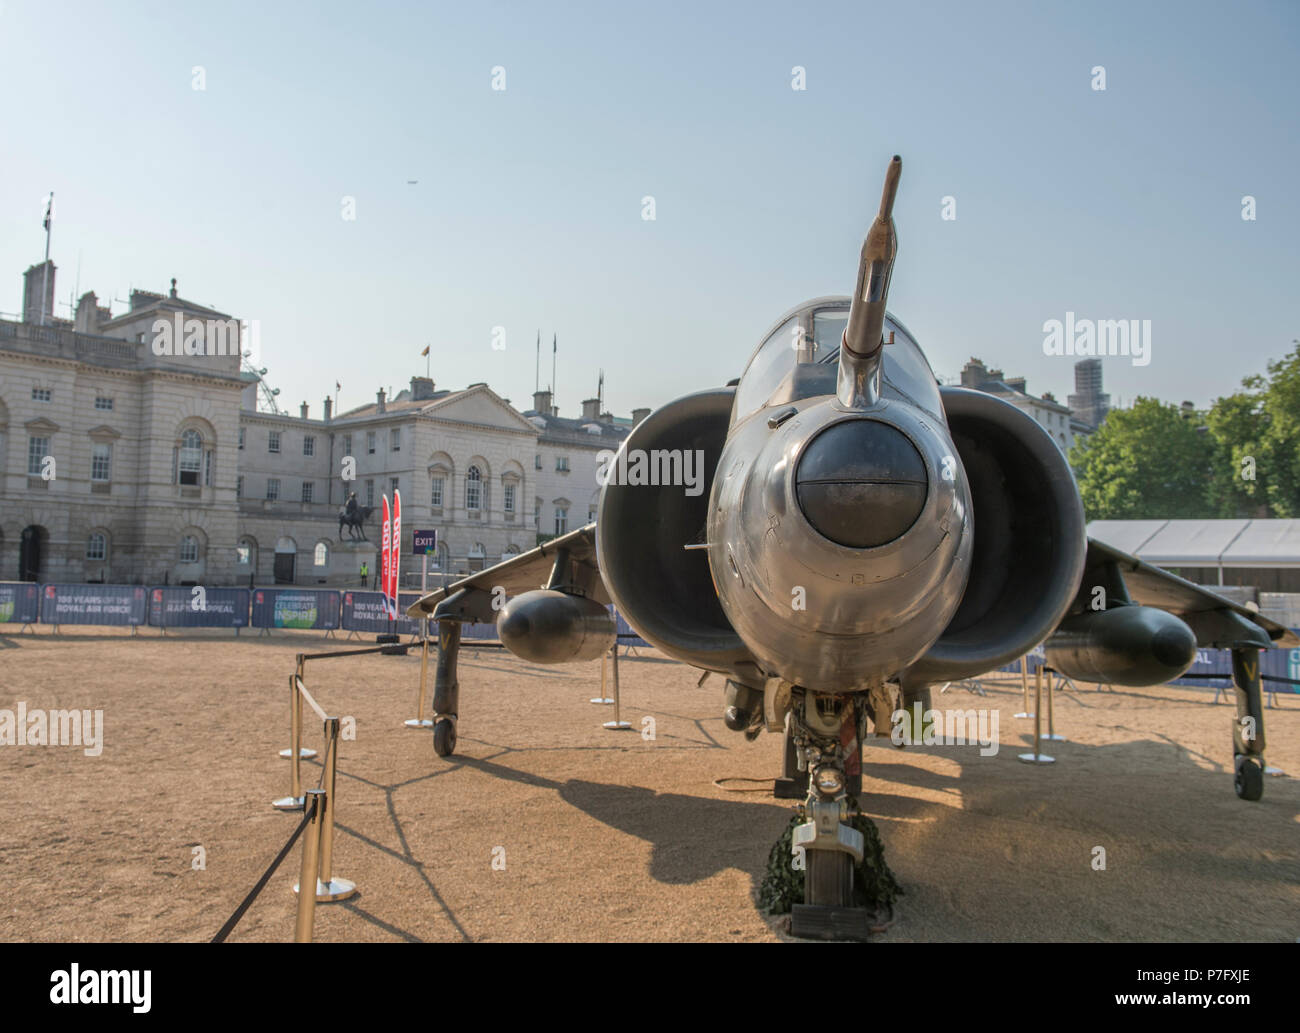 Horse Guards Parade, London, UK. 6 July, 2018. RAF100, an exhibition of aircraft covering the RAF’s history, from WW1 and WW2 through to the modern age are displayed at Horse Guards Parade in central London, open to the public from 11.00am on 6th till 9th July 2018. Static display of a VTOL Harrier GR3, the famous jump jet and veteran of the Falklands War. Credit: Malcolm Park/Alamy Live News. Stock Photo